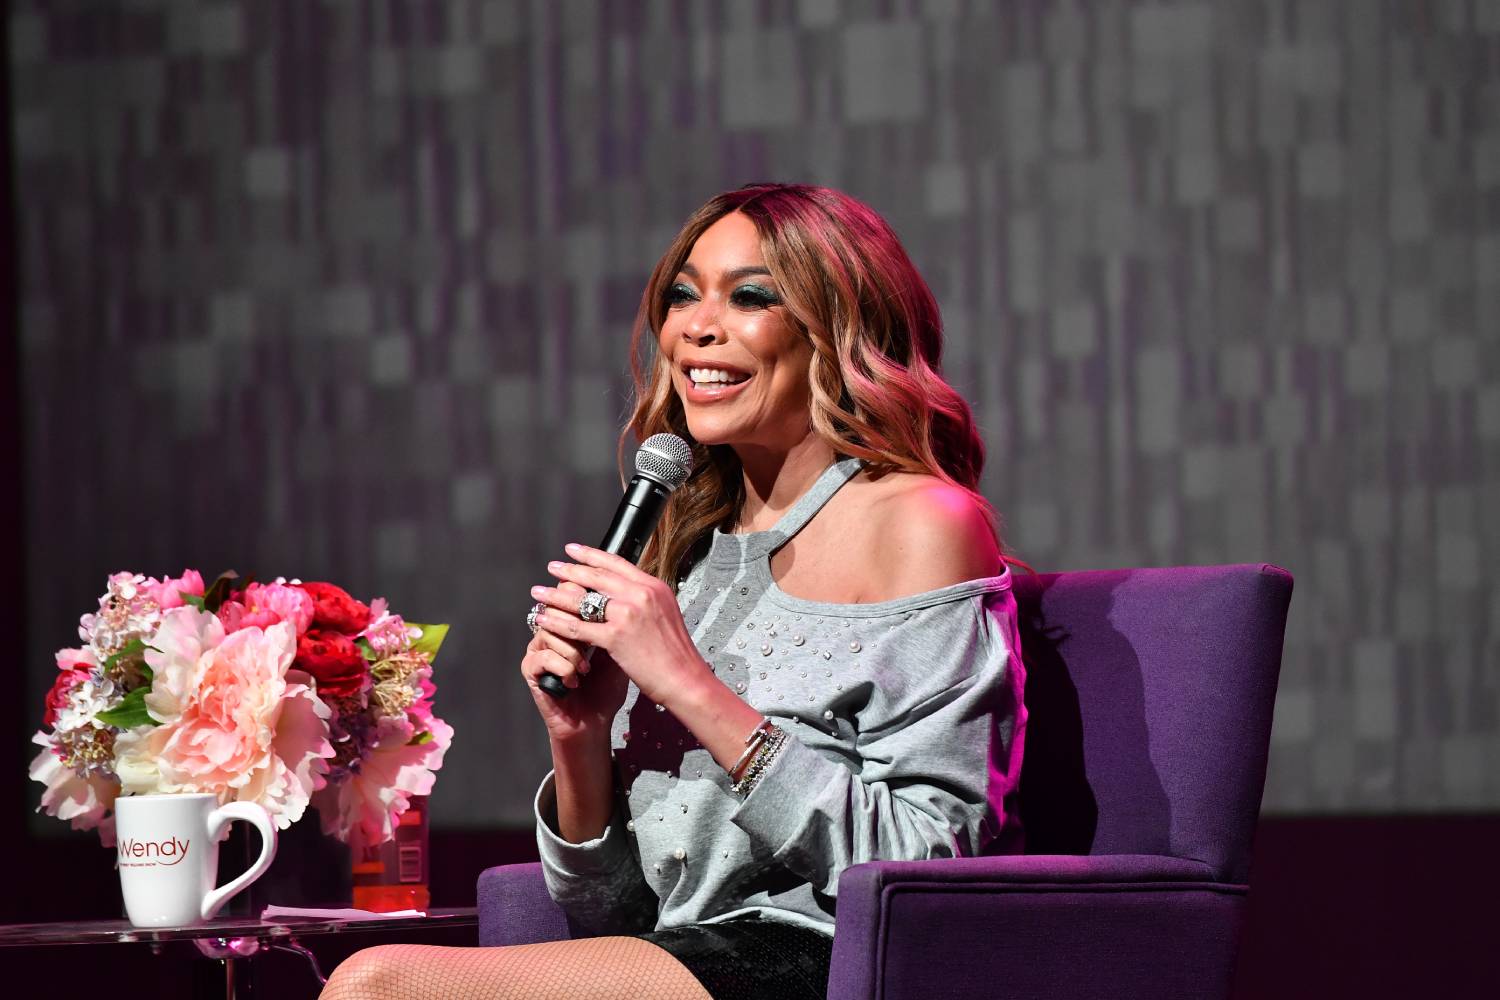 Television personality Wendy Williams speaks onstage during her celebration of 10 years of 'The Wendy Williams Show' at The Buckhead Theatre on August 16, 2018 in Atlanta, Georgi